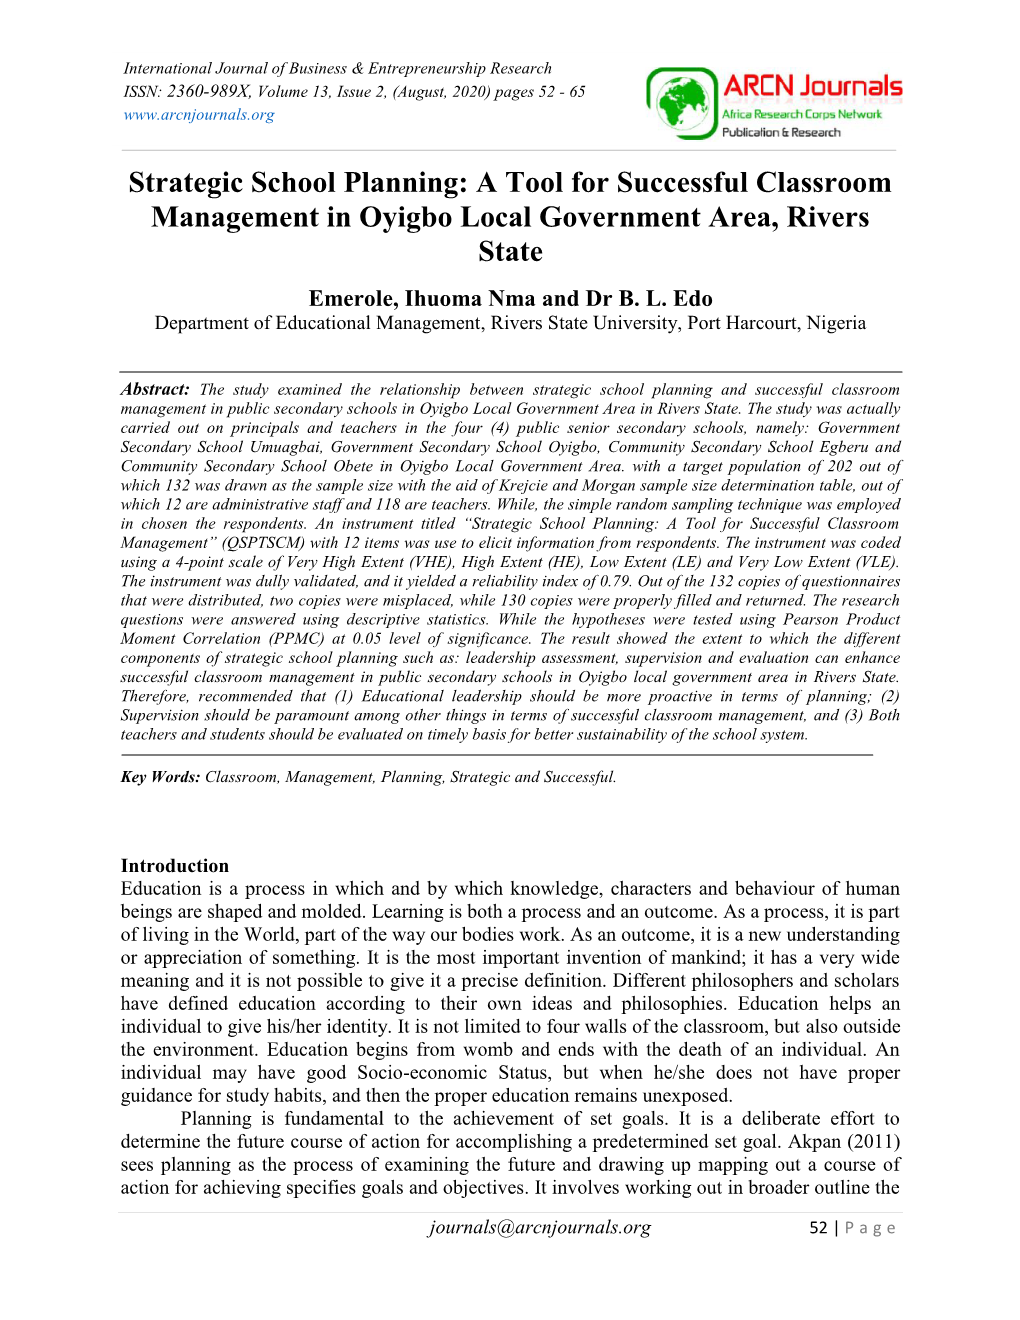 Strategic School Planning: a to Management in Oyigbo Local State